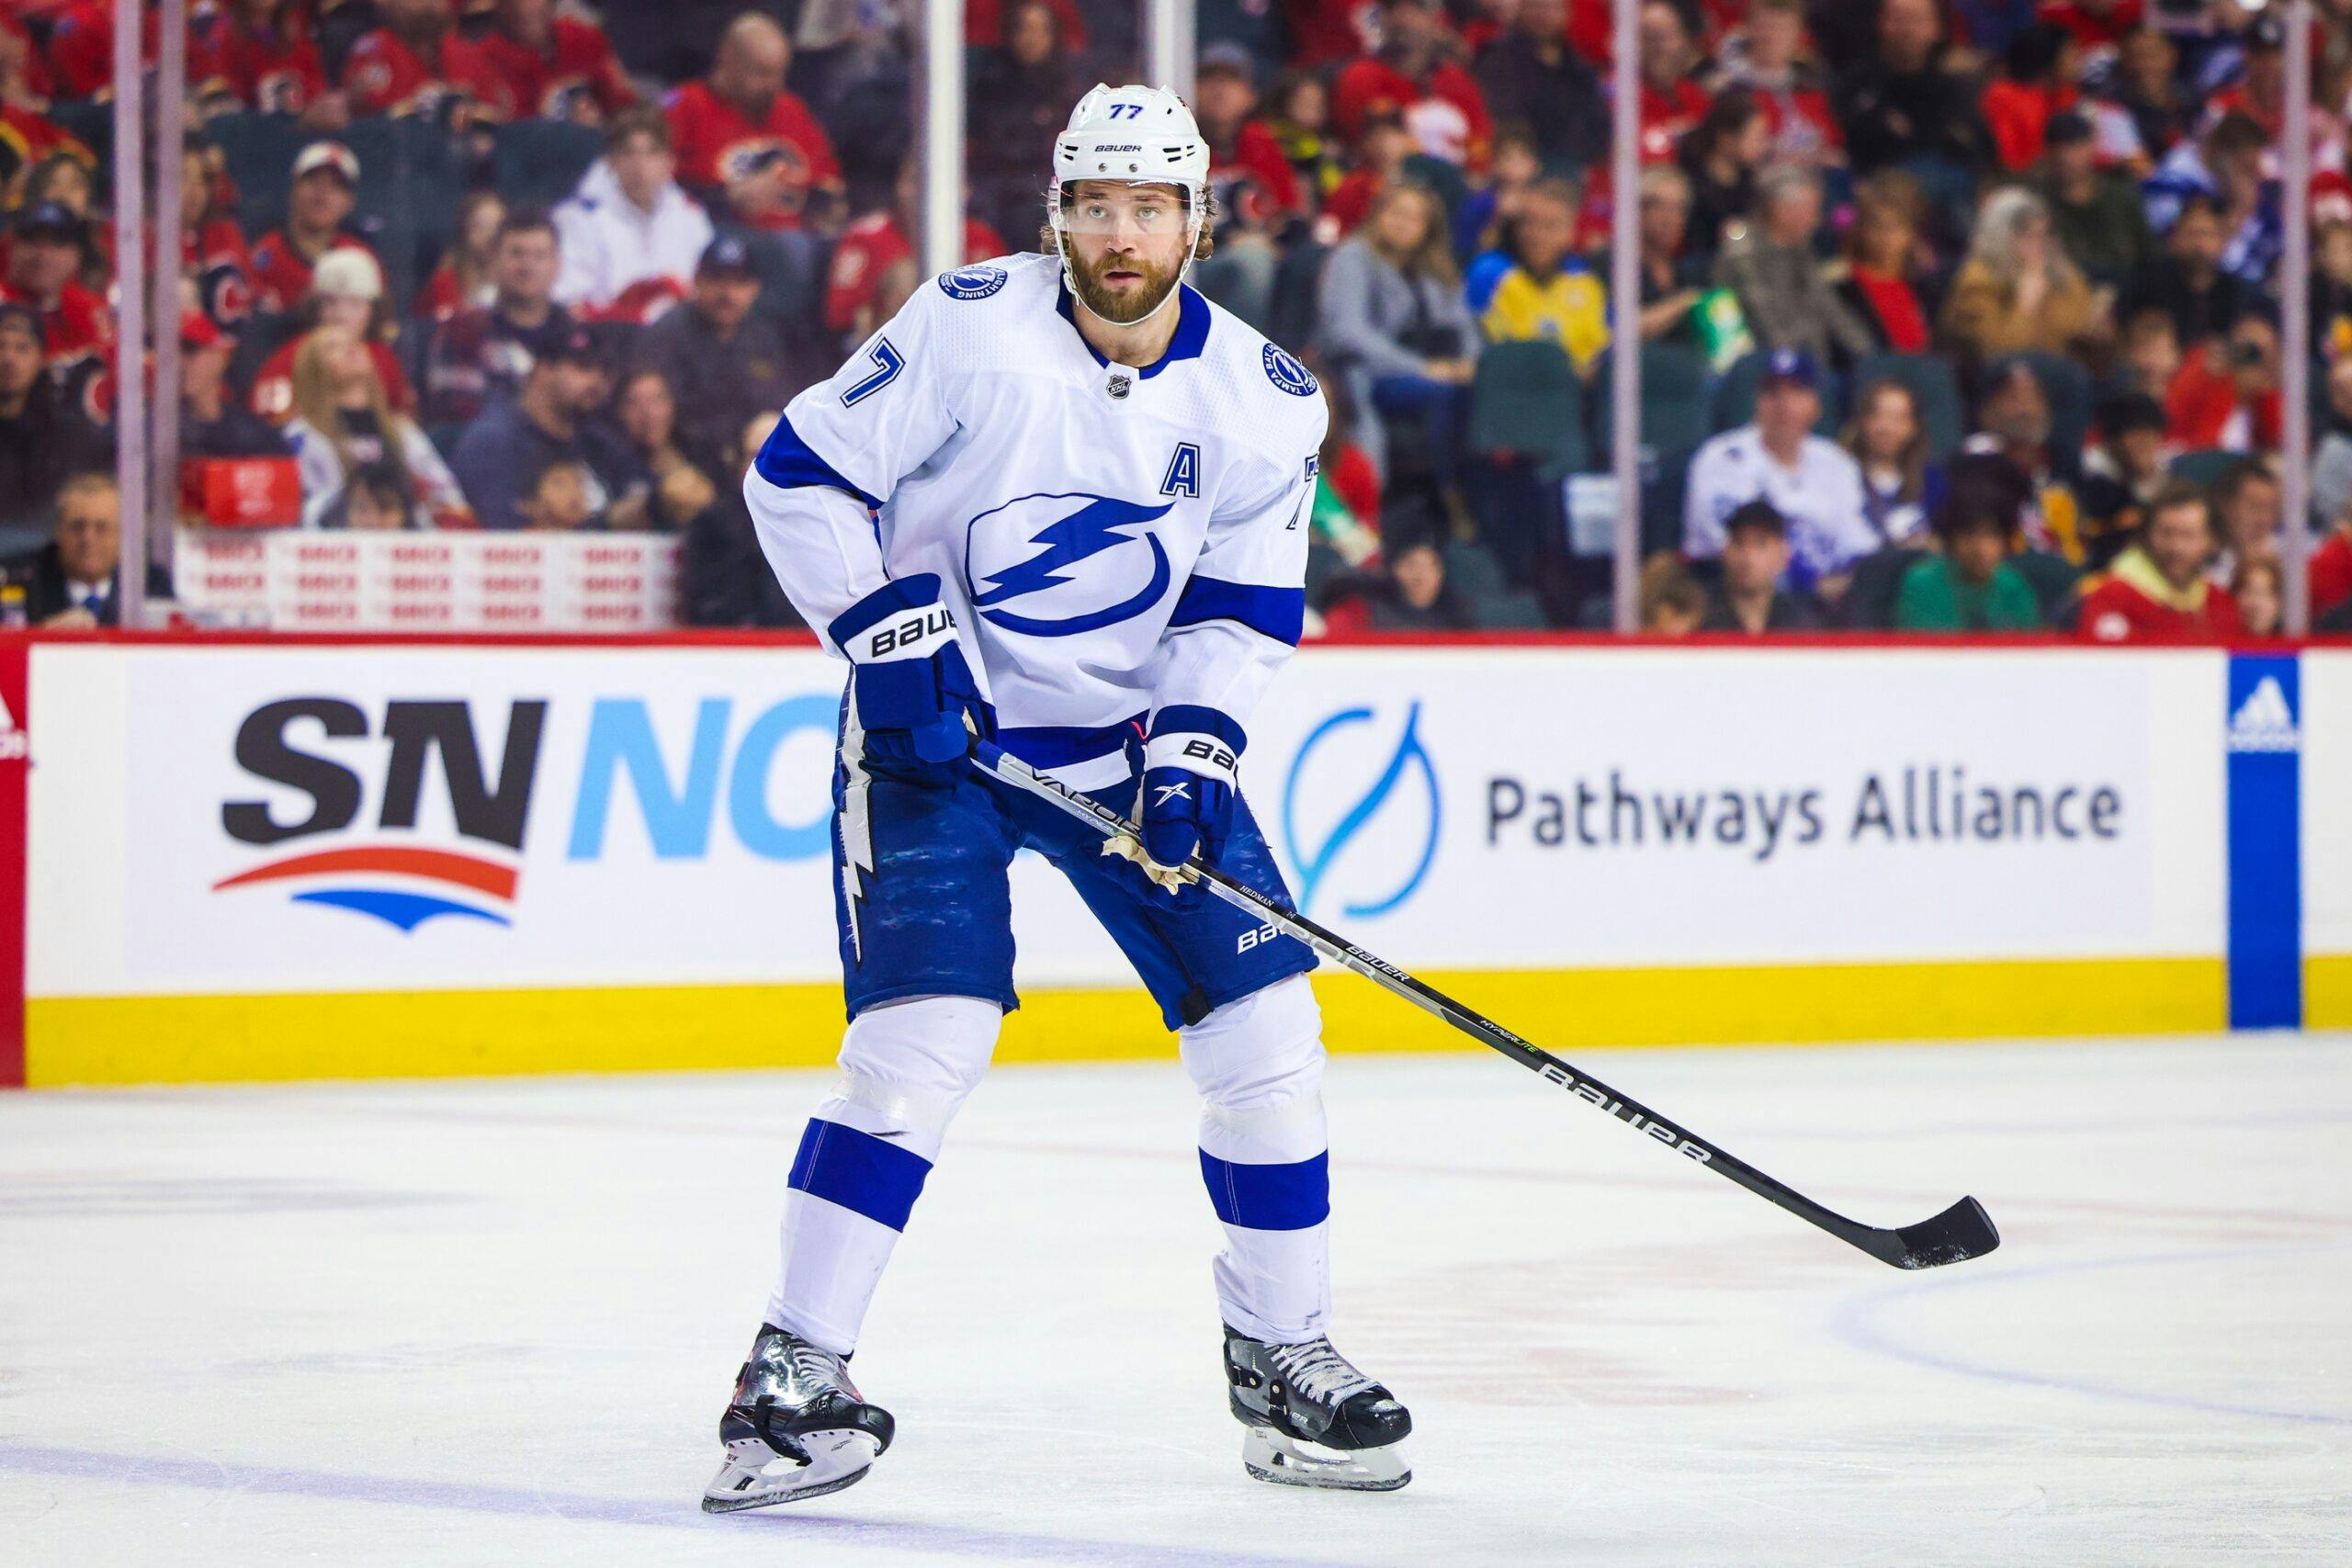 Why has the Lightning's Victor Hedman struggled defensively this season? - Daily Faceoff